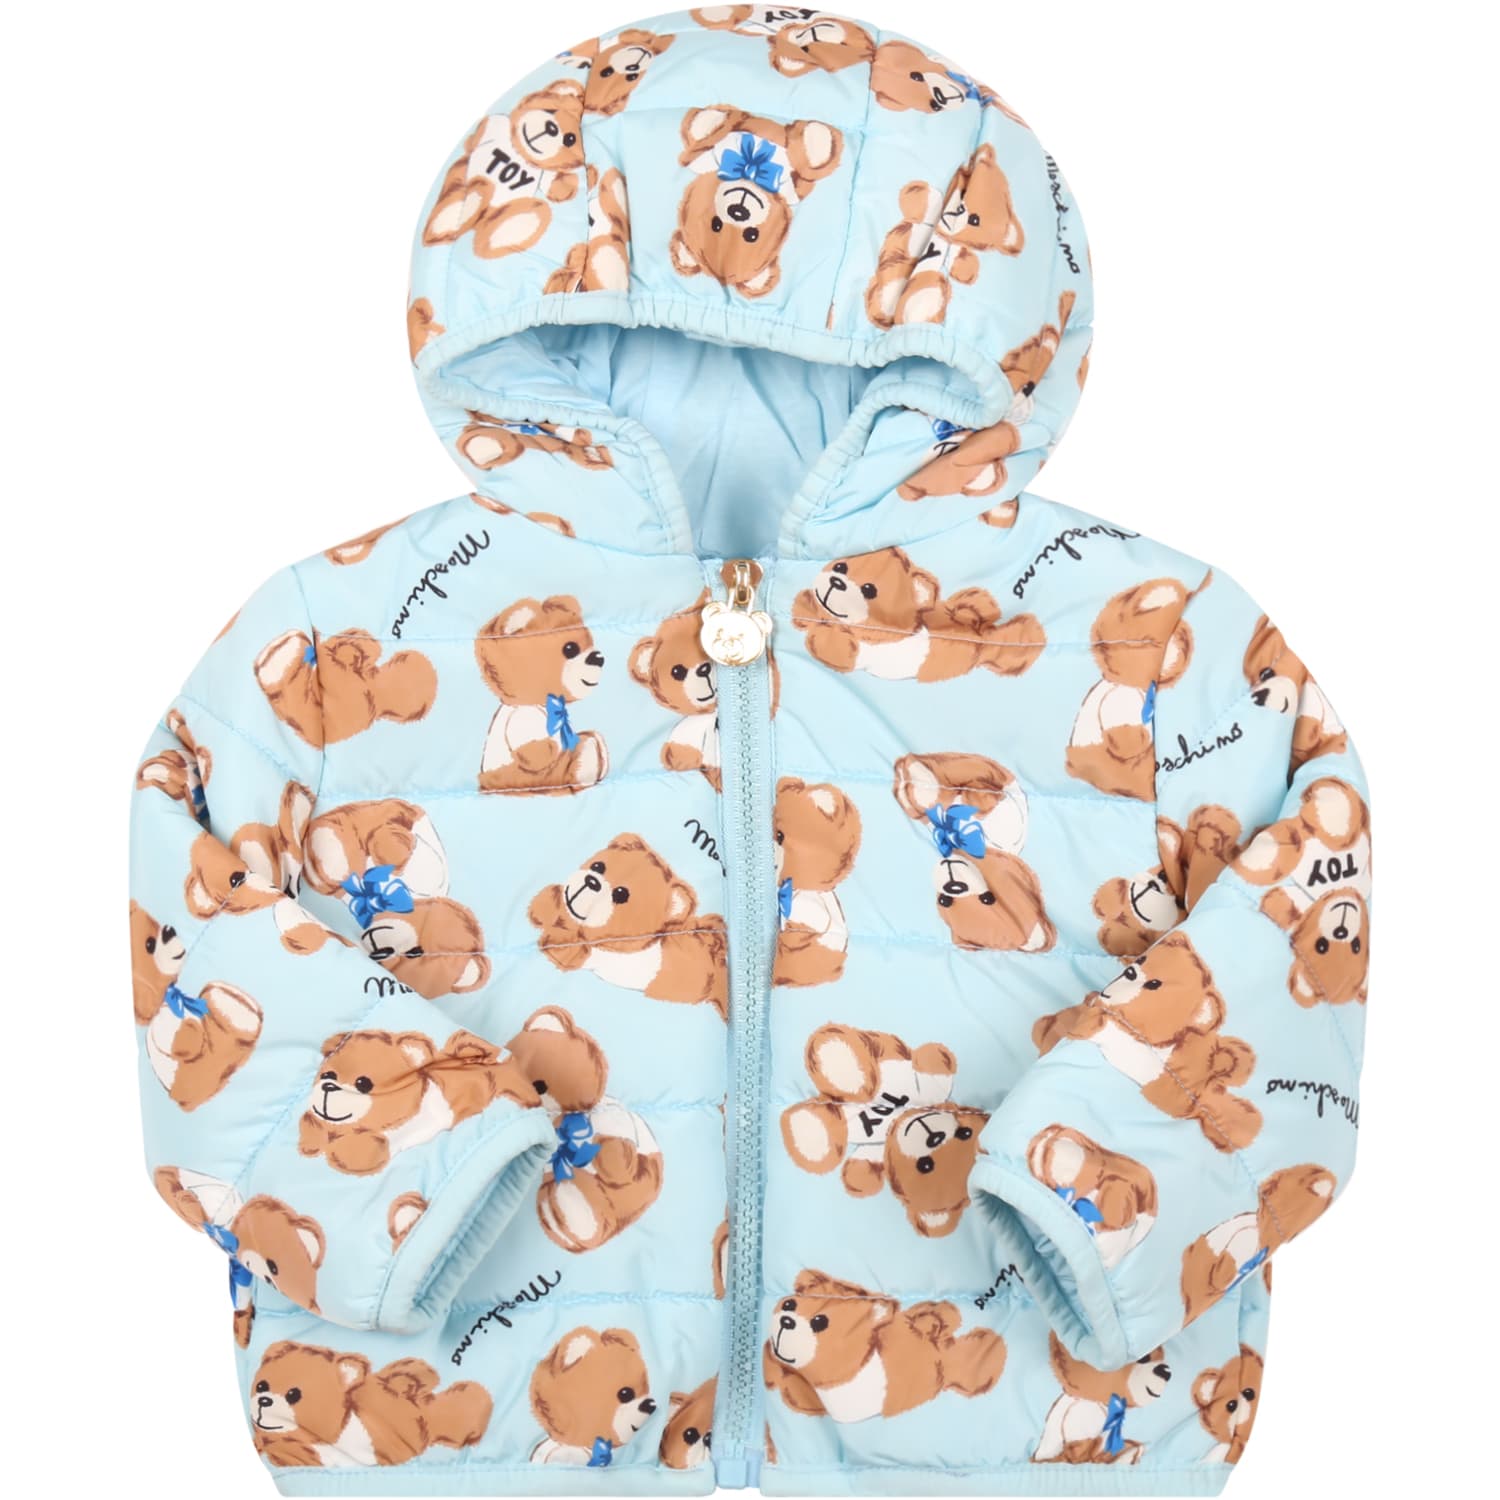 Moschino Light Blue Jacket For Baby Boy With Teddy Bears